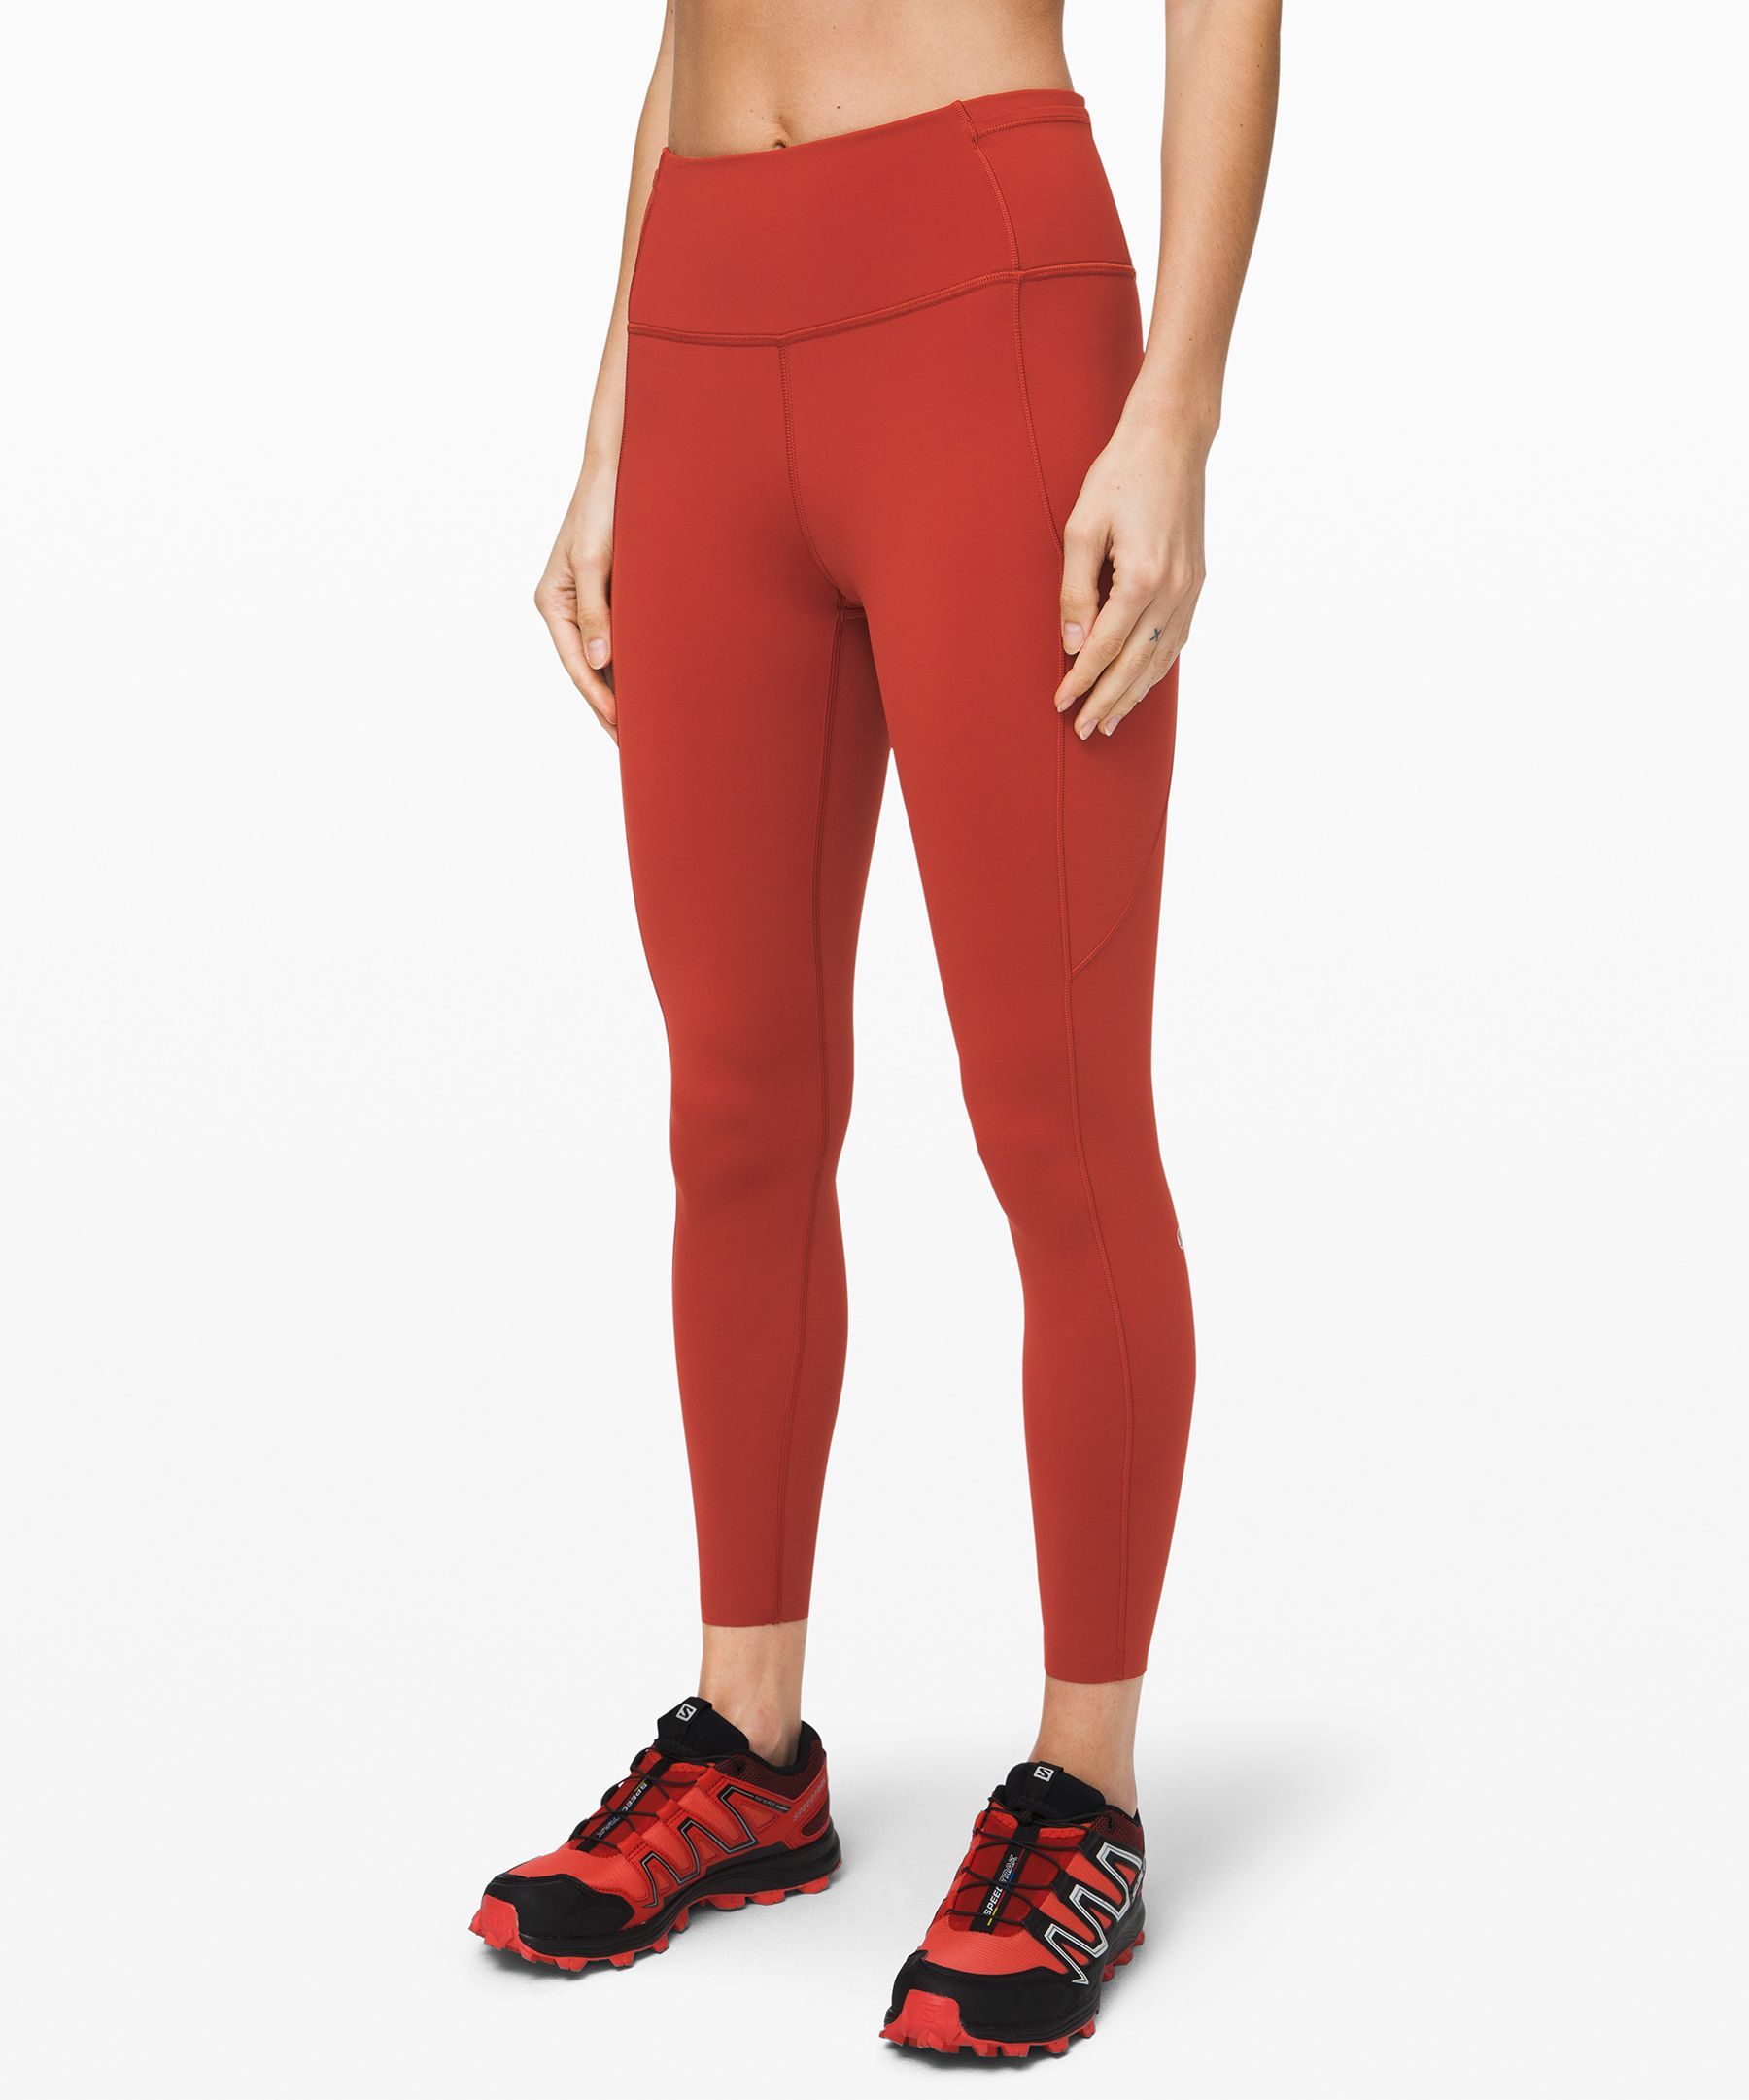 Fast and Free Tight II 25" Non-Reflective Nulux | Lululemon (US)